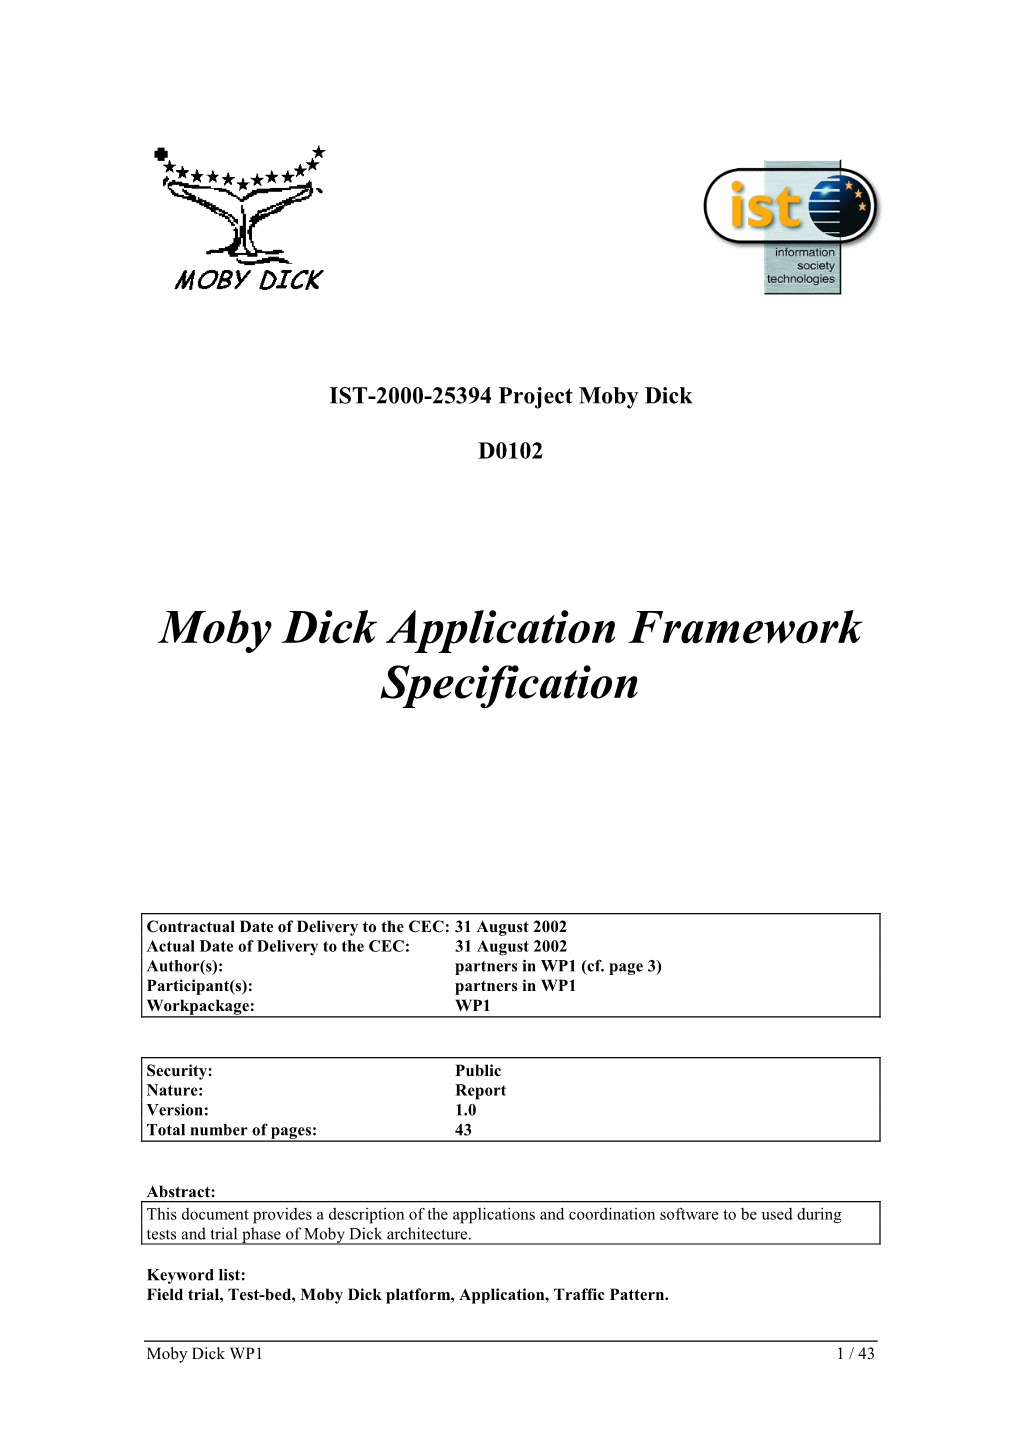 Moby Dick Application Framework Specification